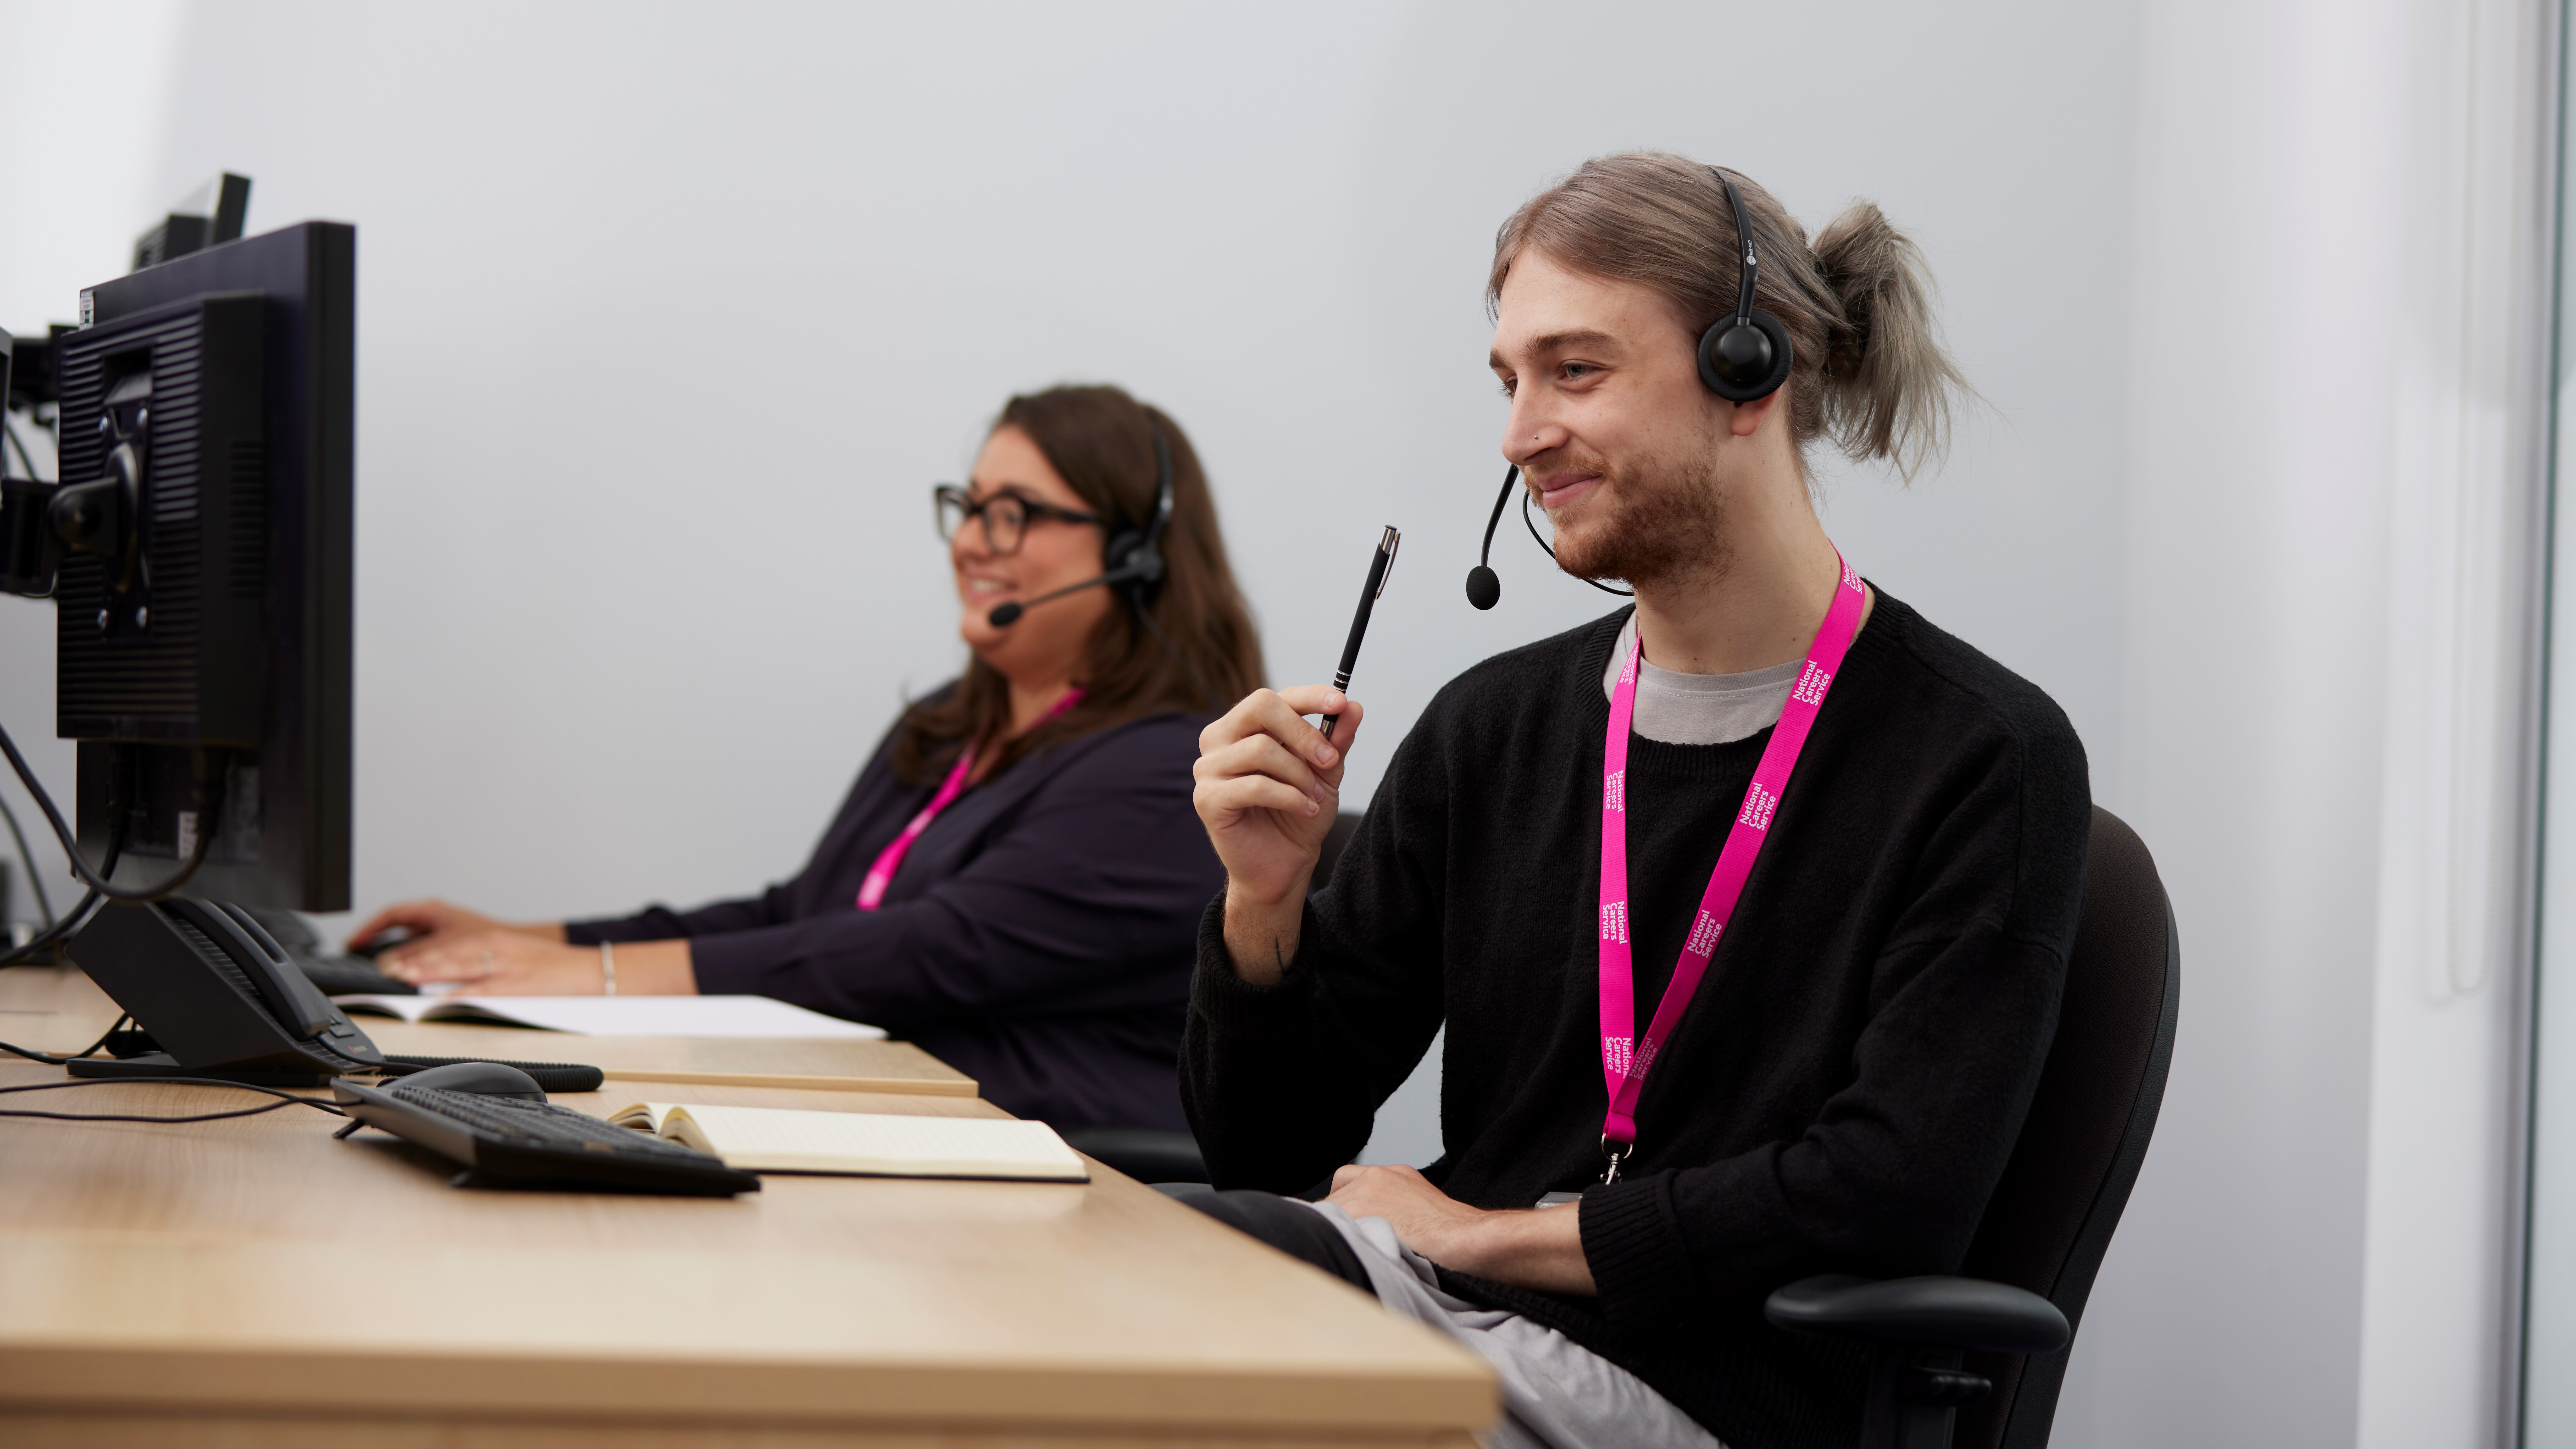 A man and a woman working at computers with headsets on.